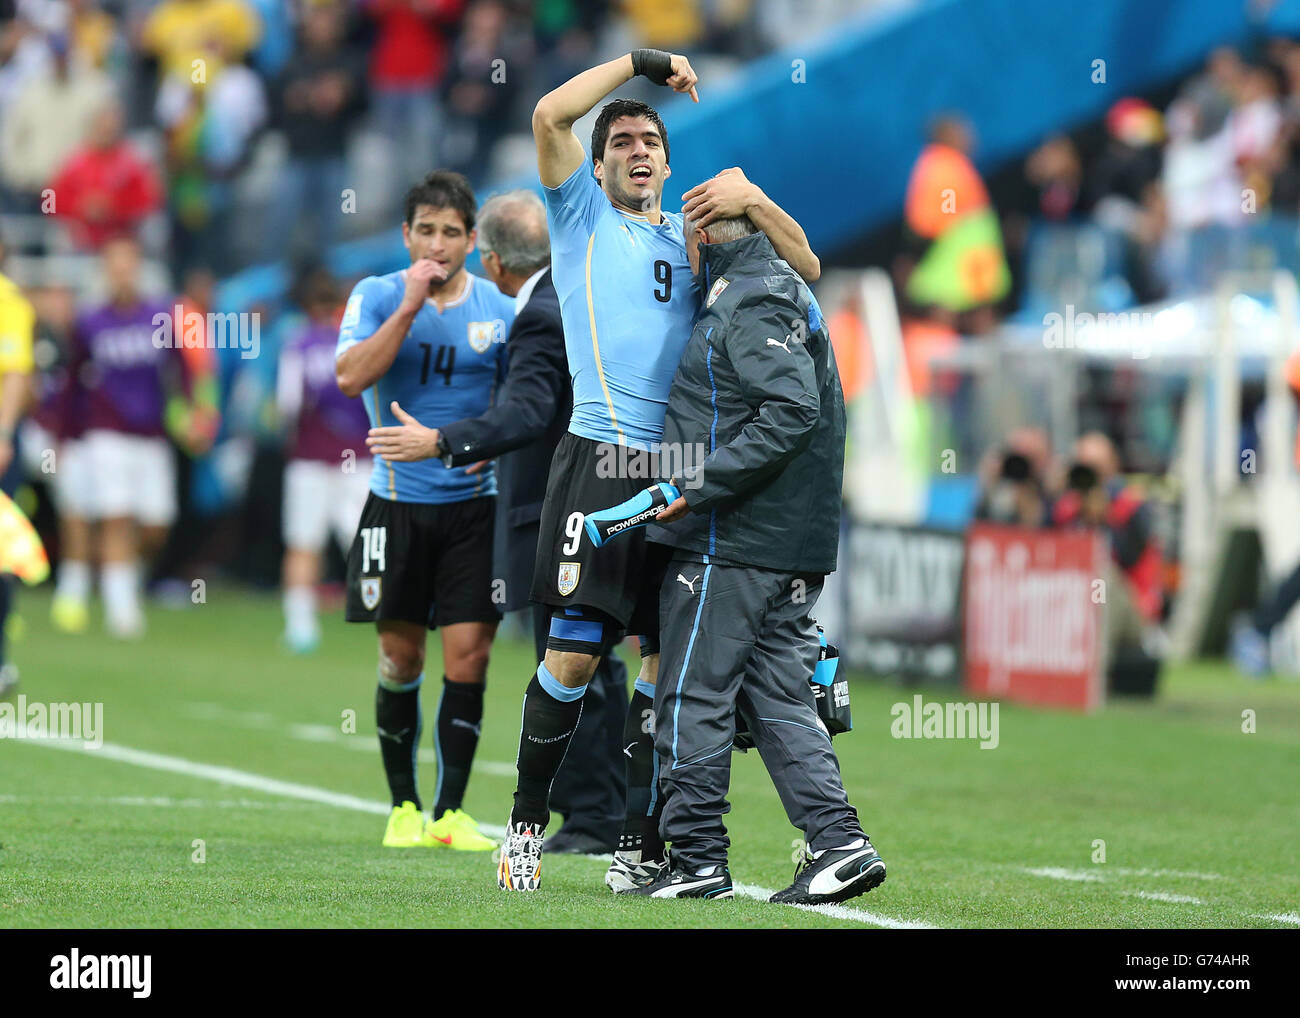 Uruguay's Luis Suarez celebrates on the touchline after scoring his side's first goal during the Group D match the Estadio do Sao Paulo, Sao Paulo, Brazil. Stock Photo